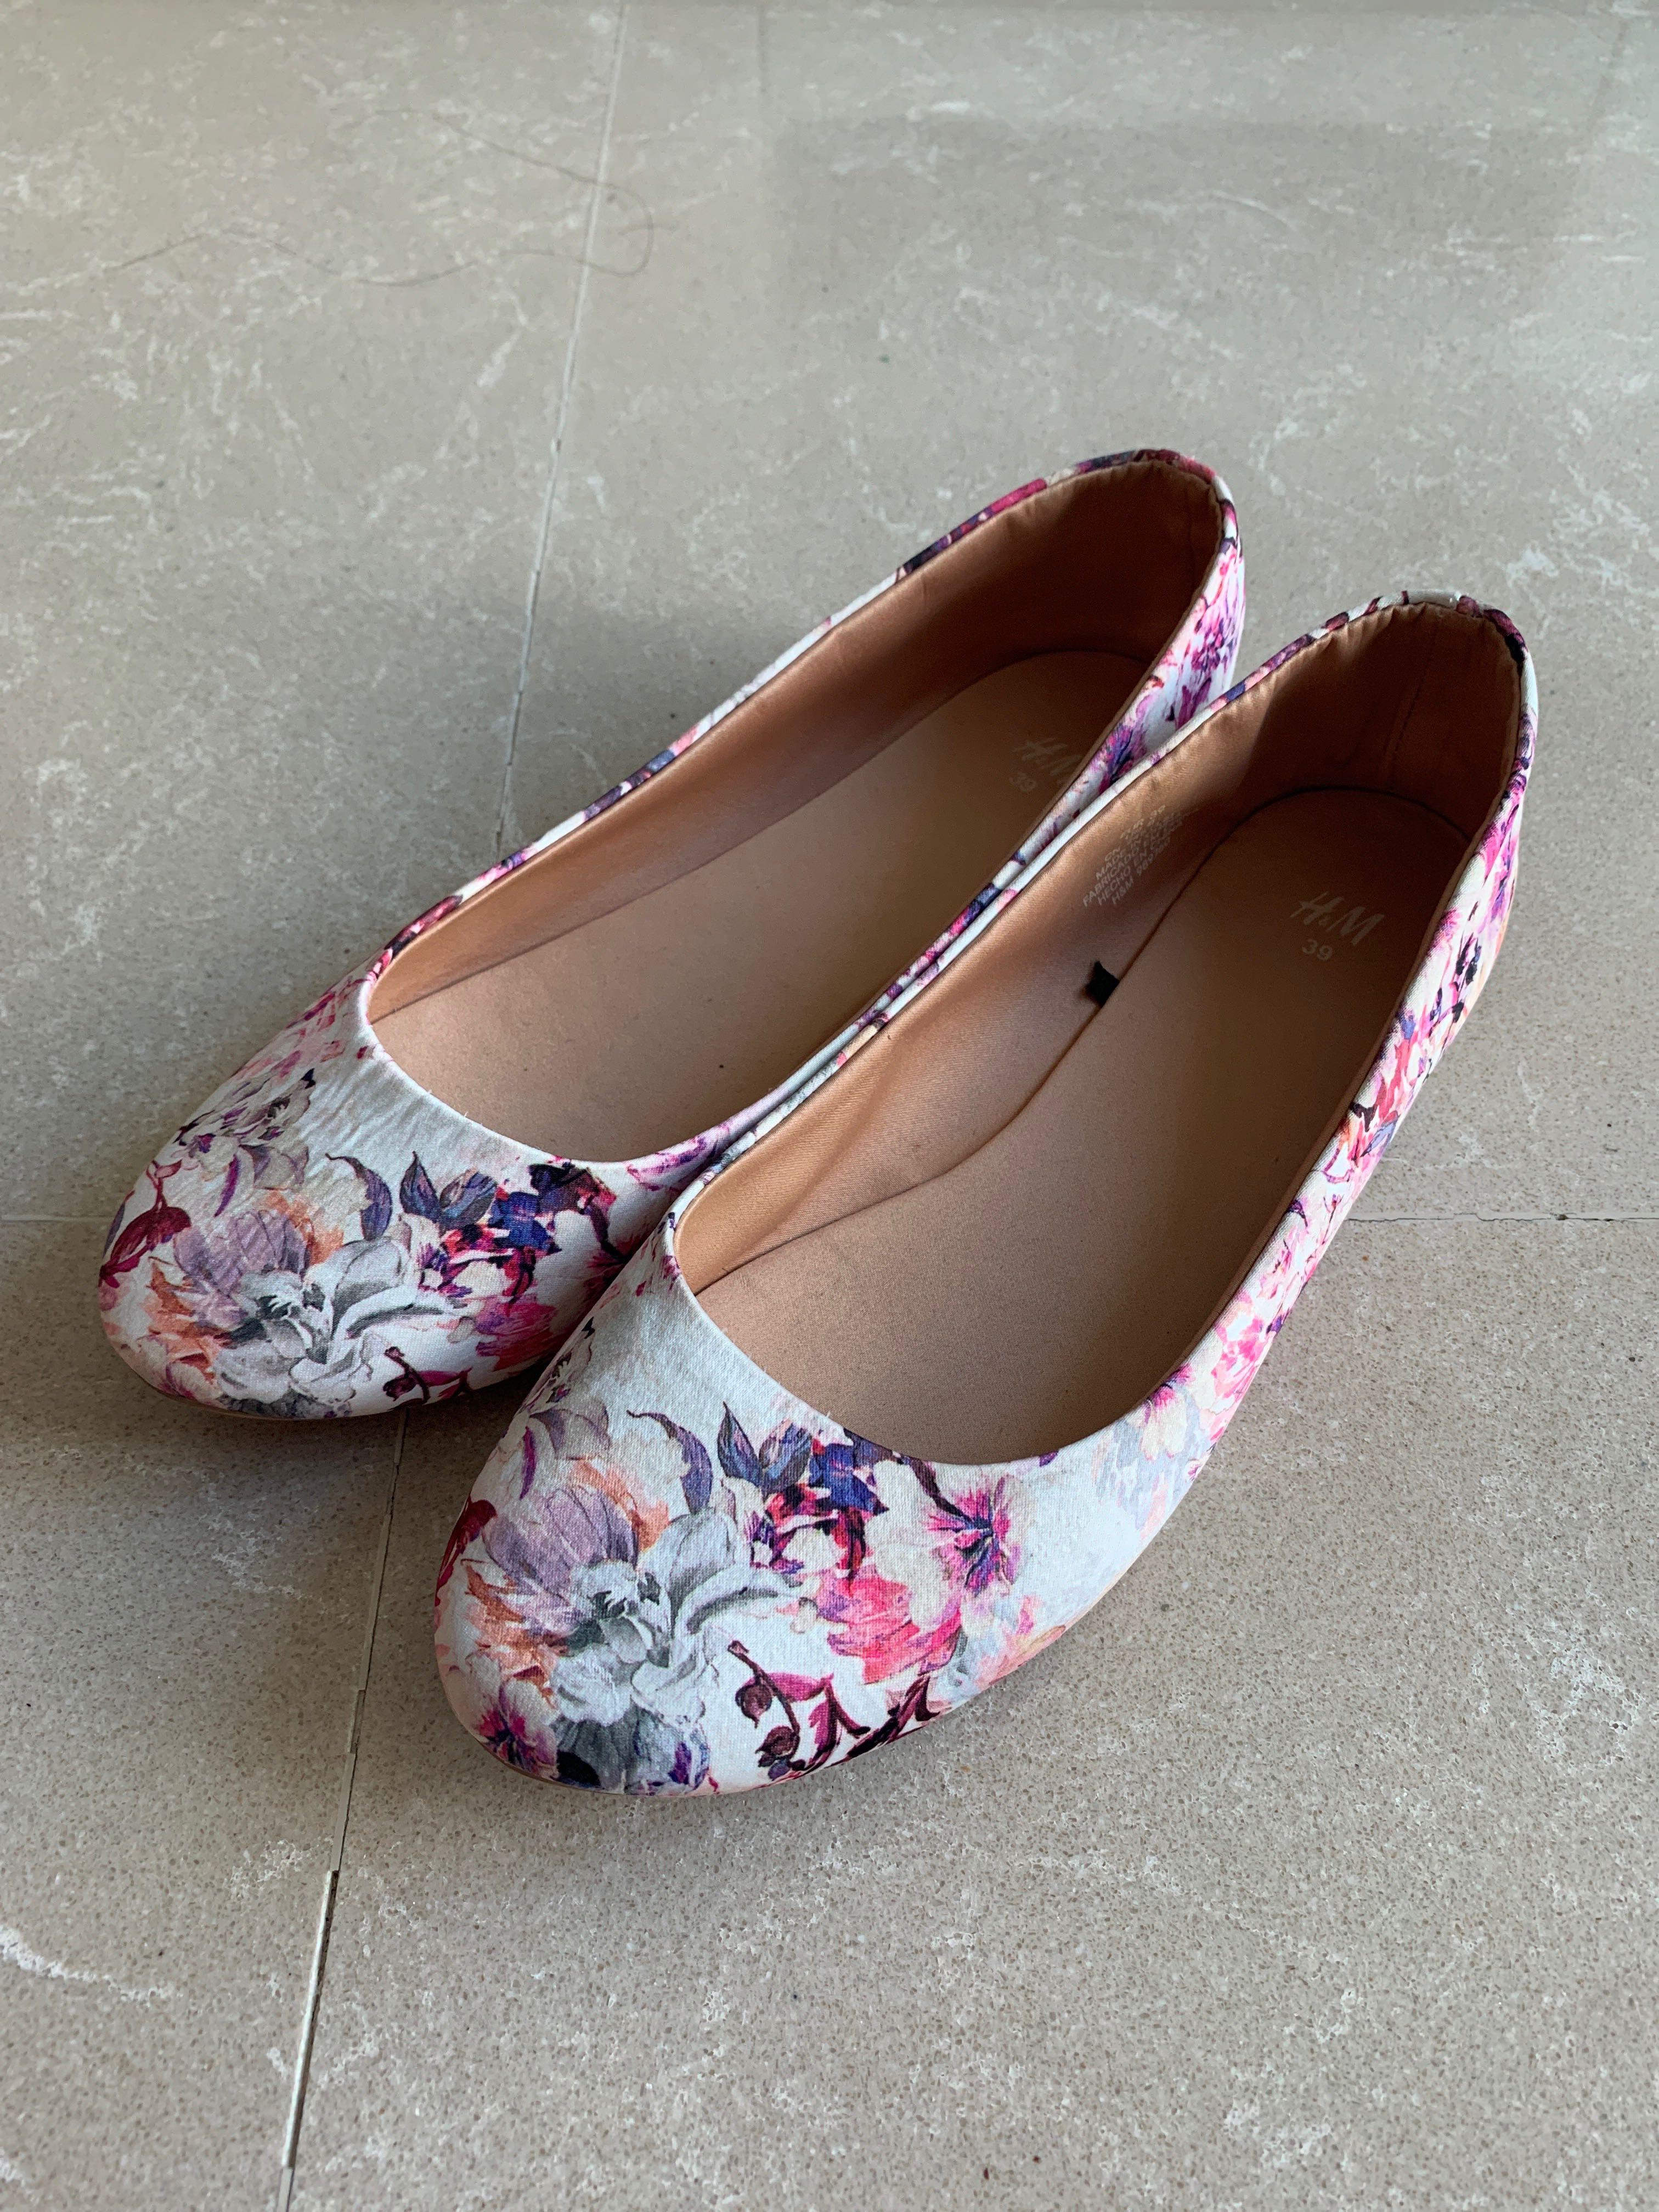 Floral flats! Lilac, pink and purple flowers. Worn twice., Women's